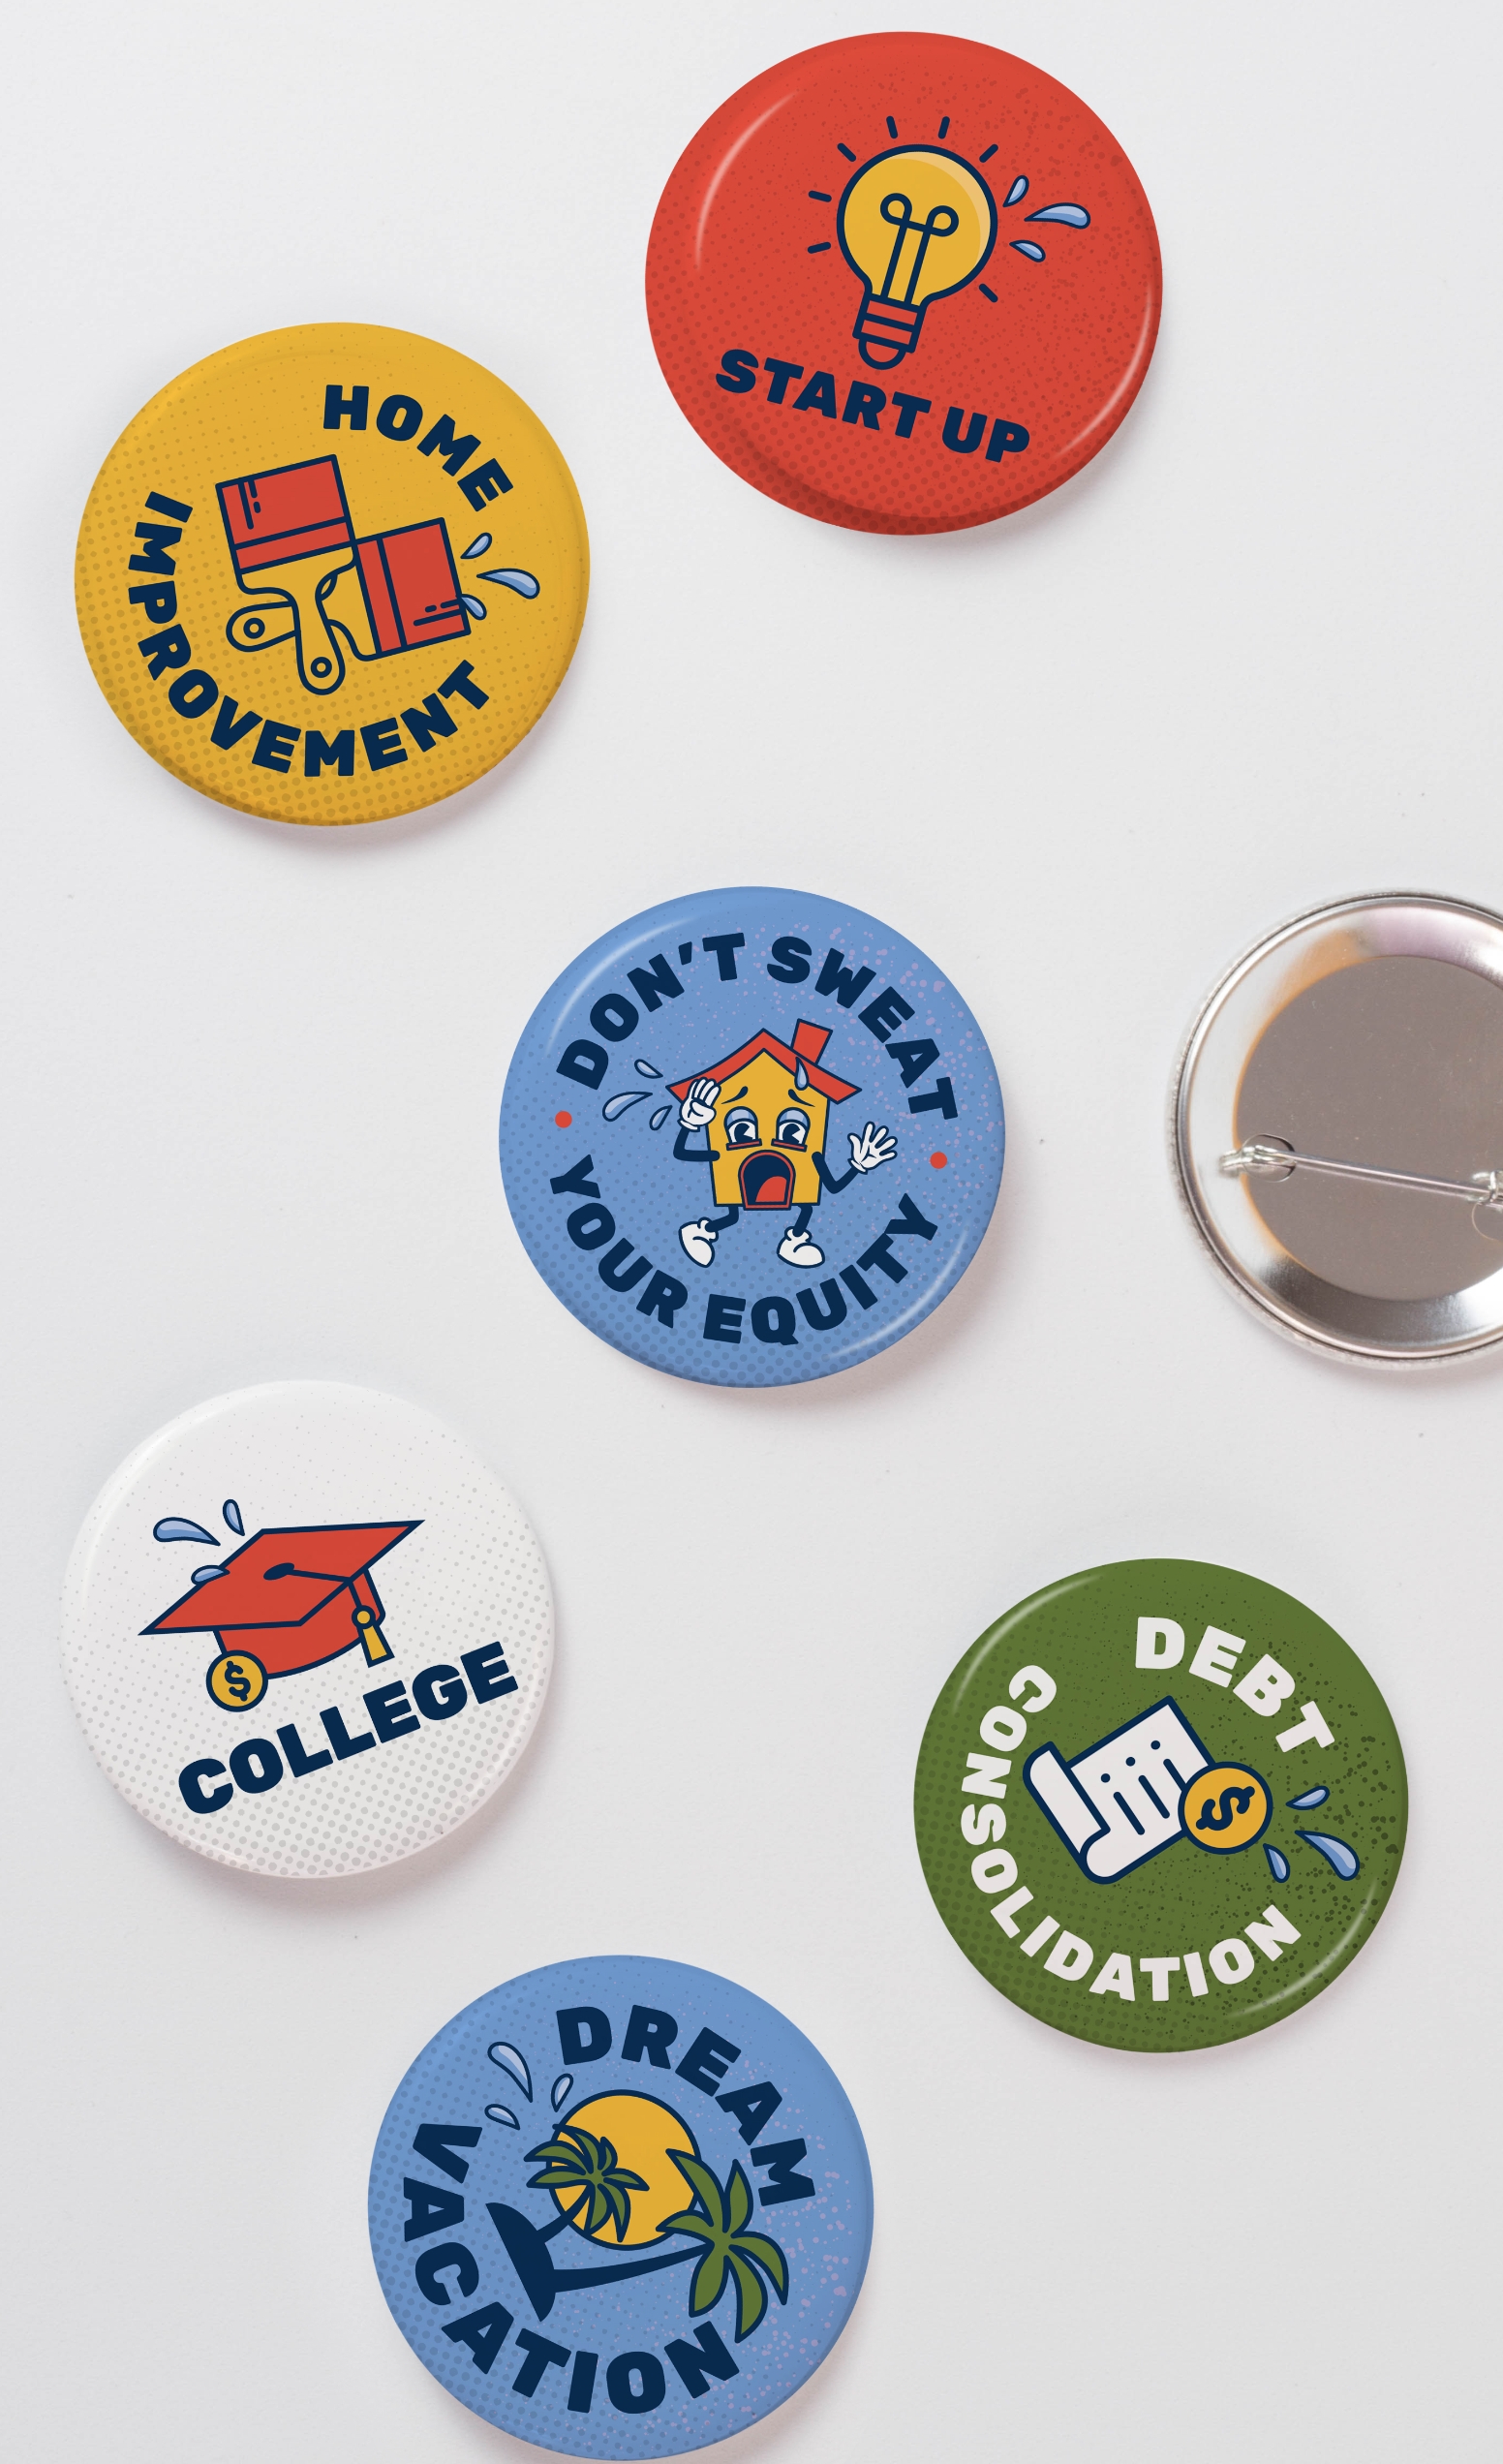 series of buttons with icons and reasons to borrow: home improvement, start up, dream vacation, debt consolidation, college